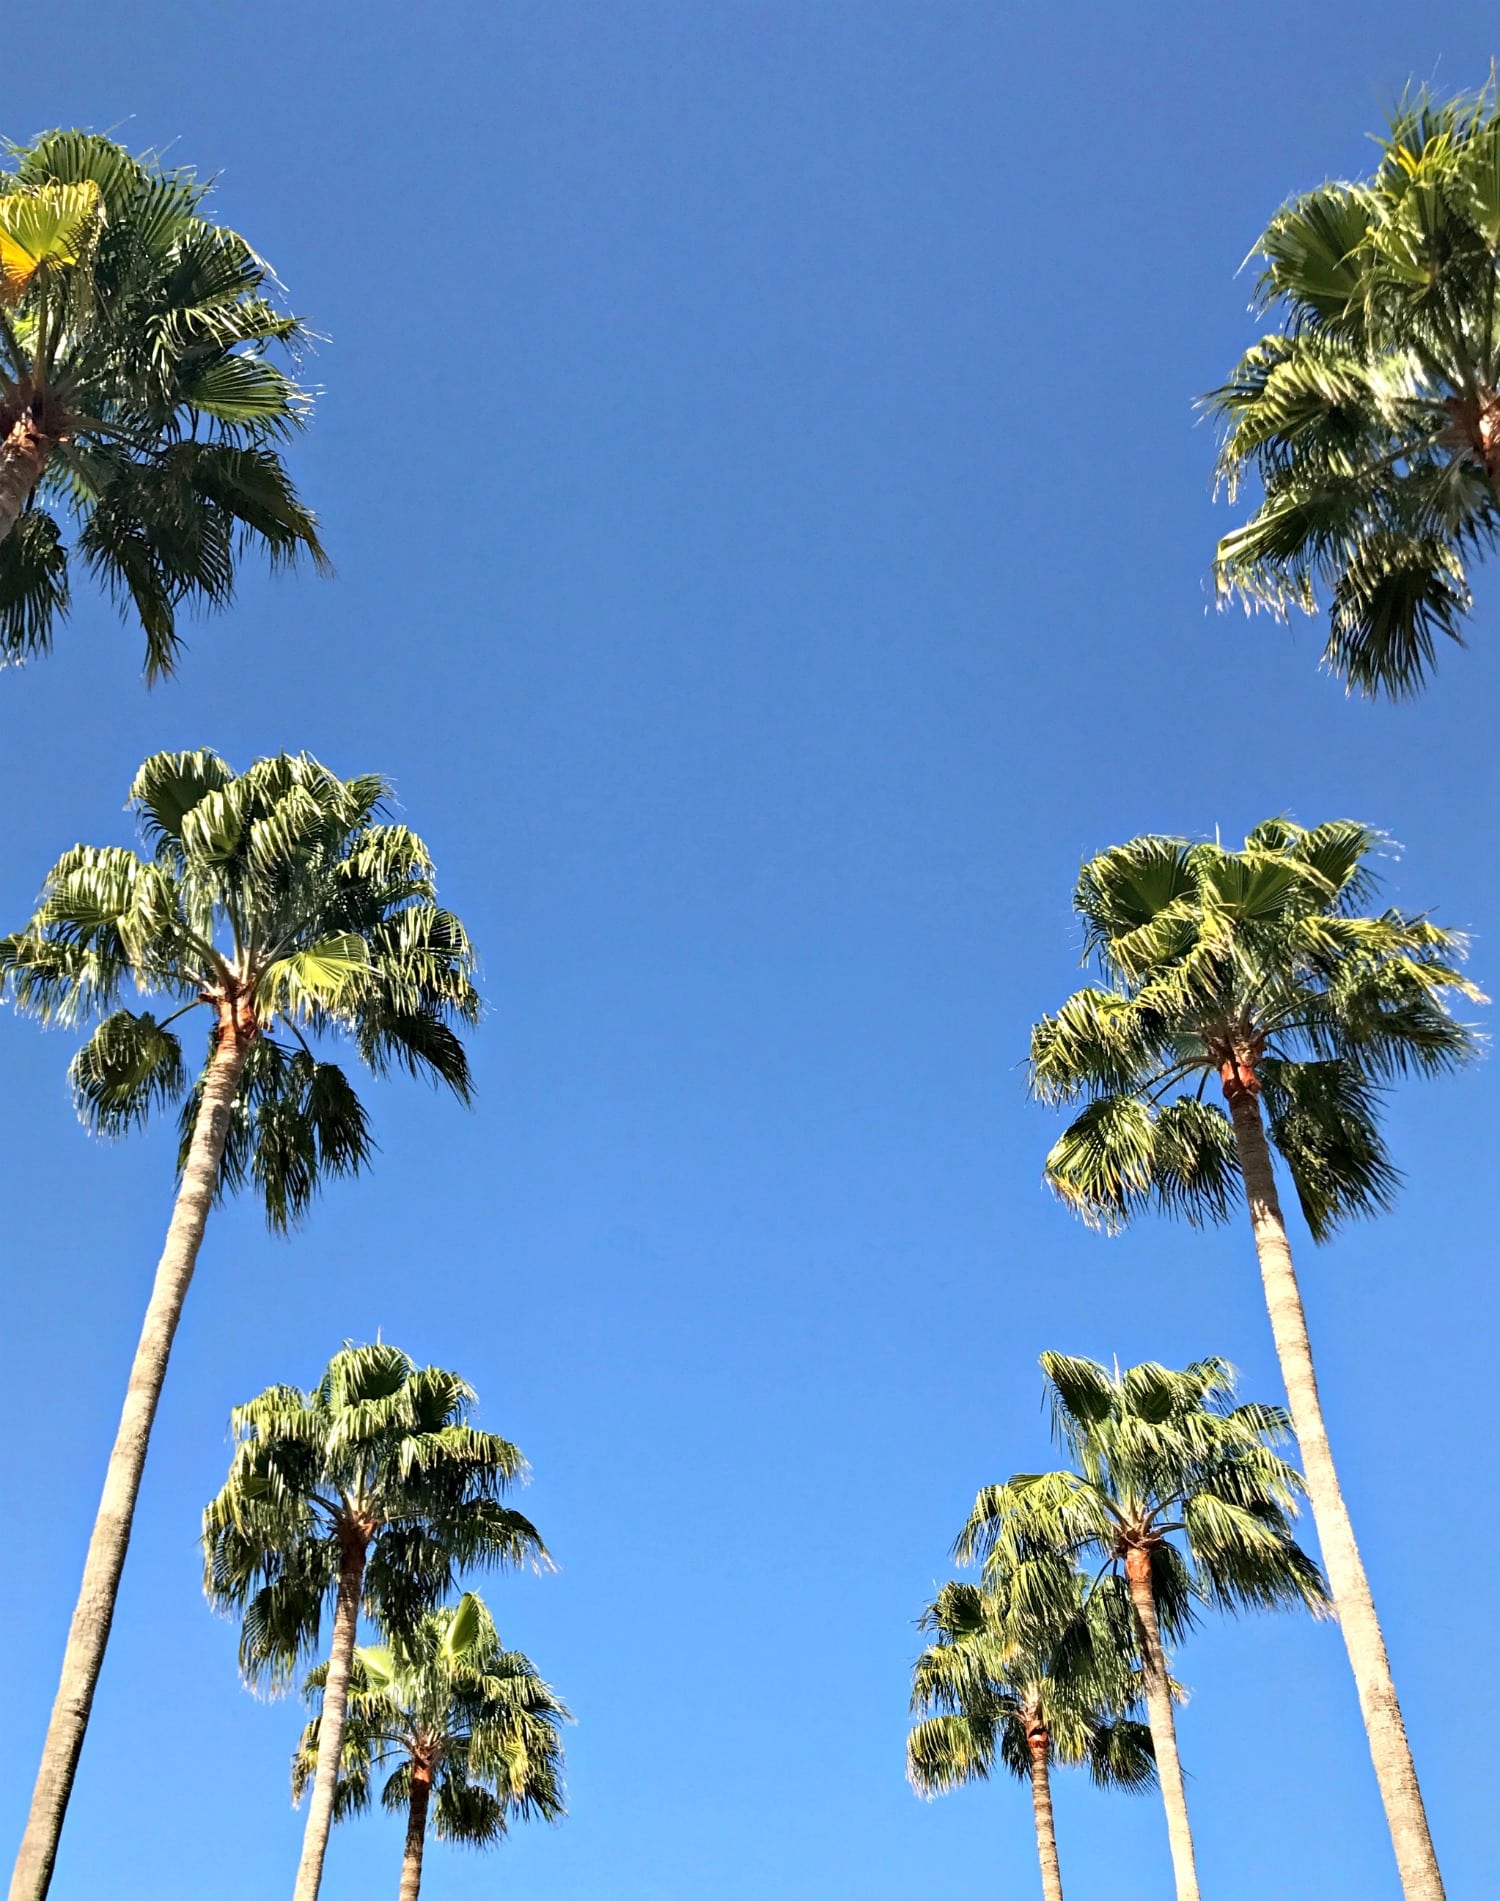 Tampa Florida Travel Guide | Marry Me on A Megabus Giveaway | Affordable Travel Options | Florida Travel Blogger Ashley Brooke Nicholas | Blue Skies and Palm Trees